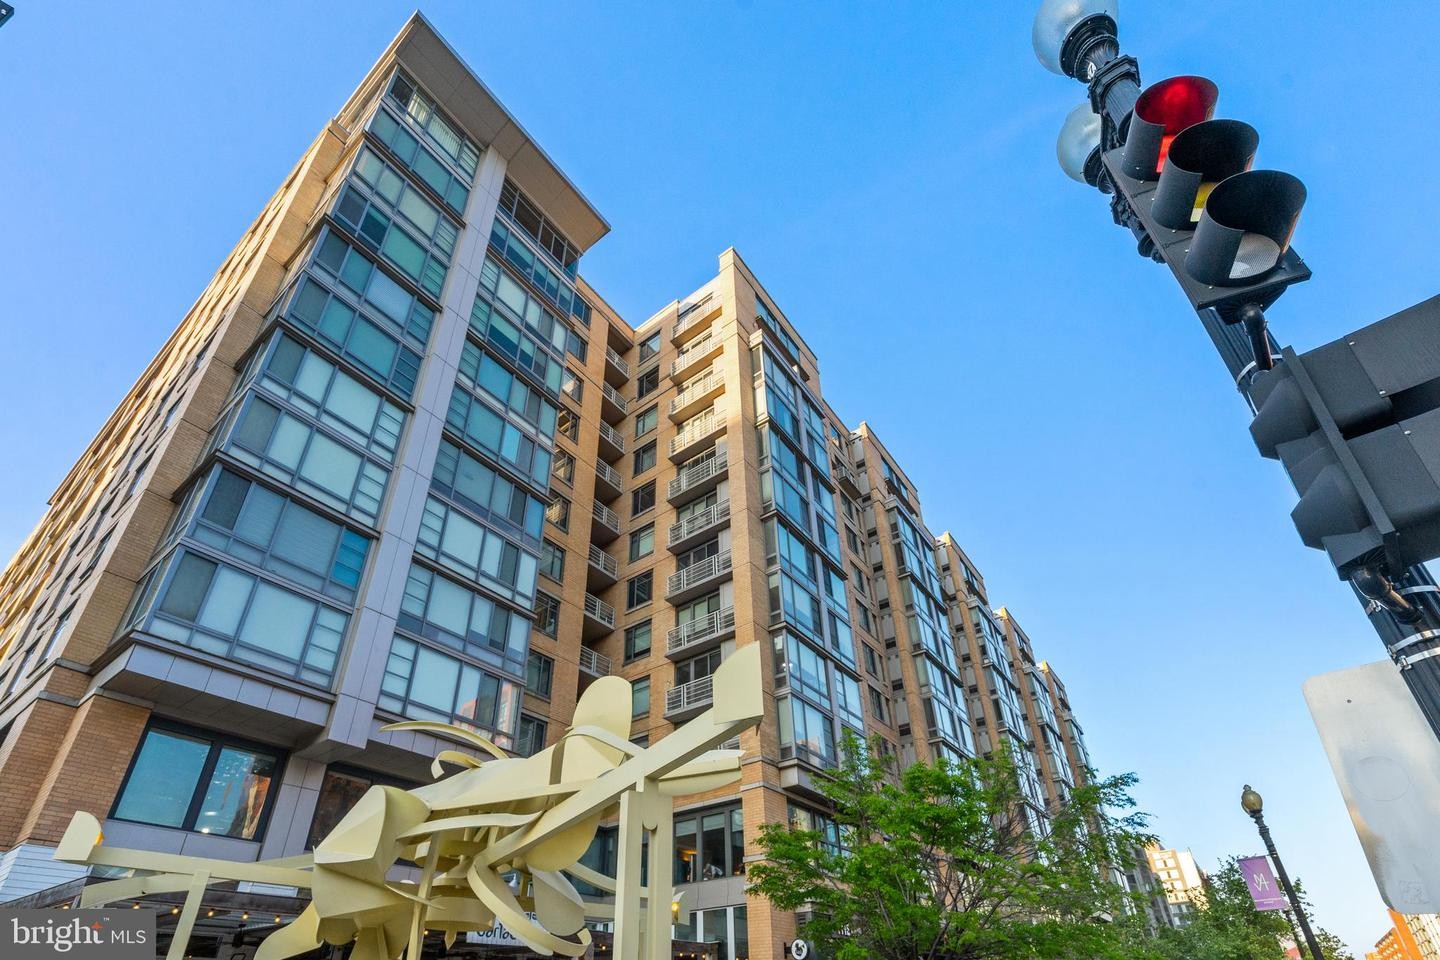 11. 475 K St NW 